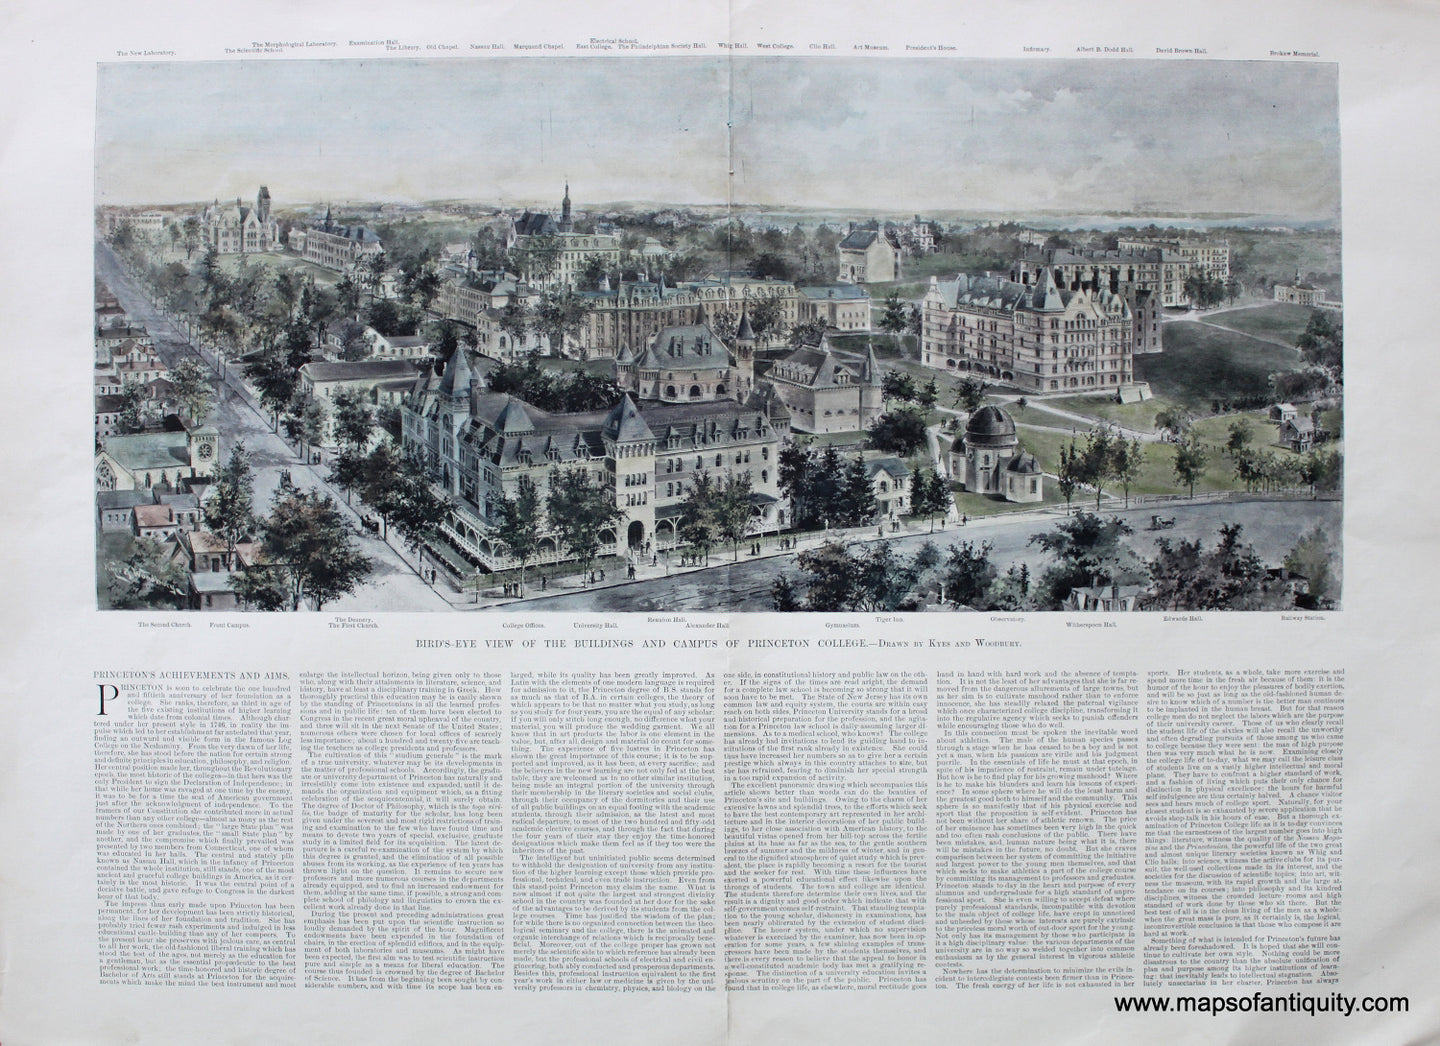 Hand-Colored-Antique-Illustration-Bird's-Eye-View-of-the-Buildings-and-Campus-of-Princeton-College-********-College---1896-Harper's-Weekly-Maps-Of-Antiquity